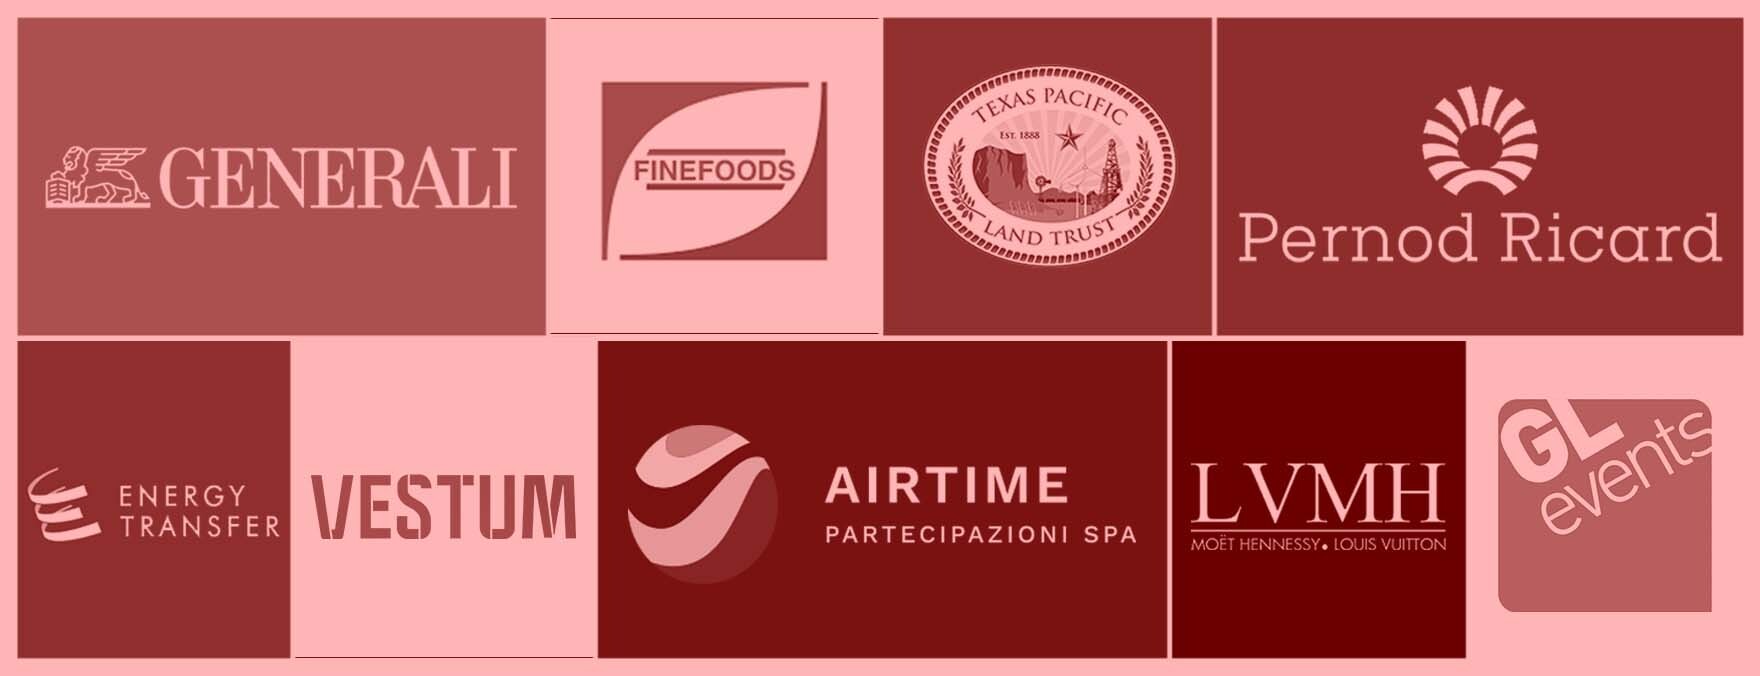 Collage of Logos of the companies in red shade: Generali, Finefood, Texas Pacific, Pernord Richart, Energy Transfer,  Vestum, Airtime, LVMH and GL events.